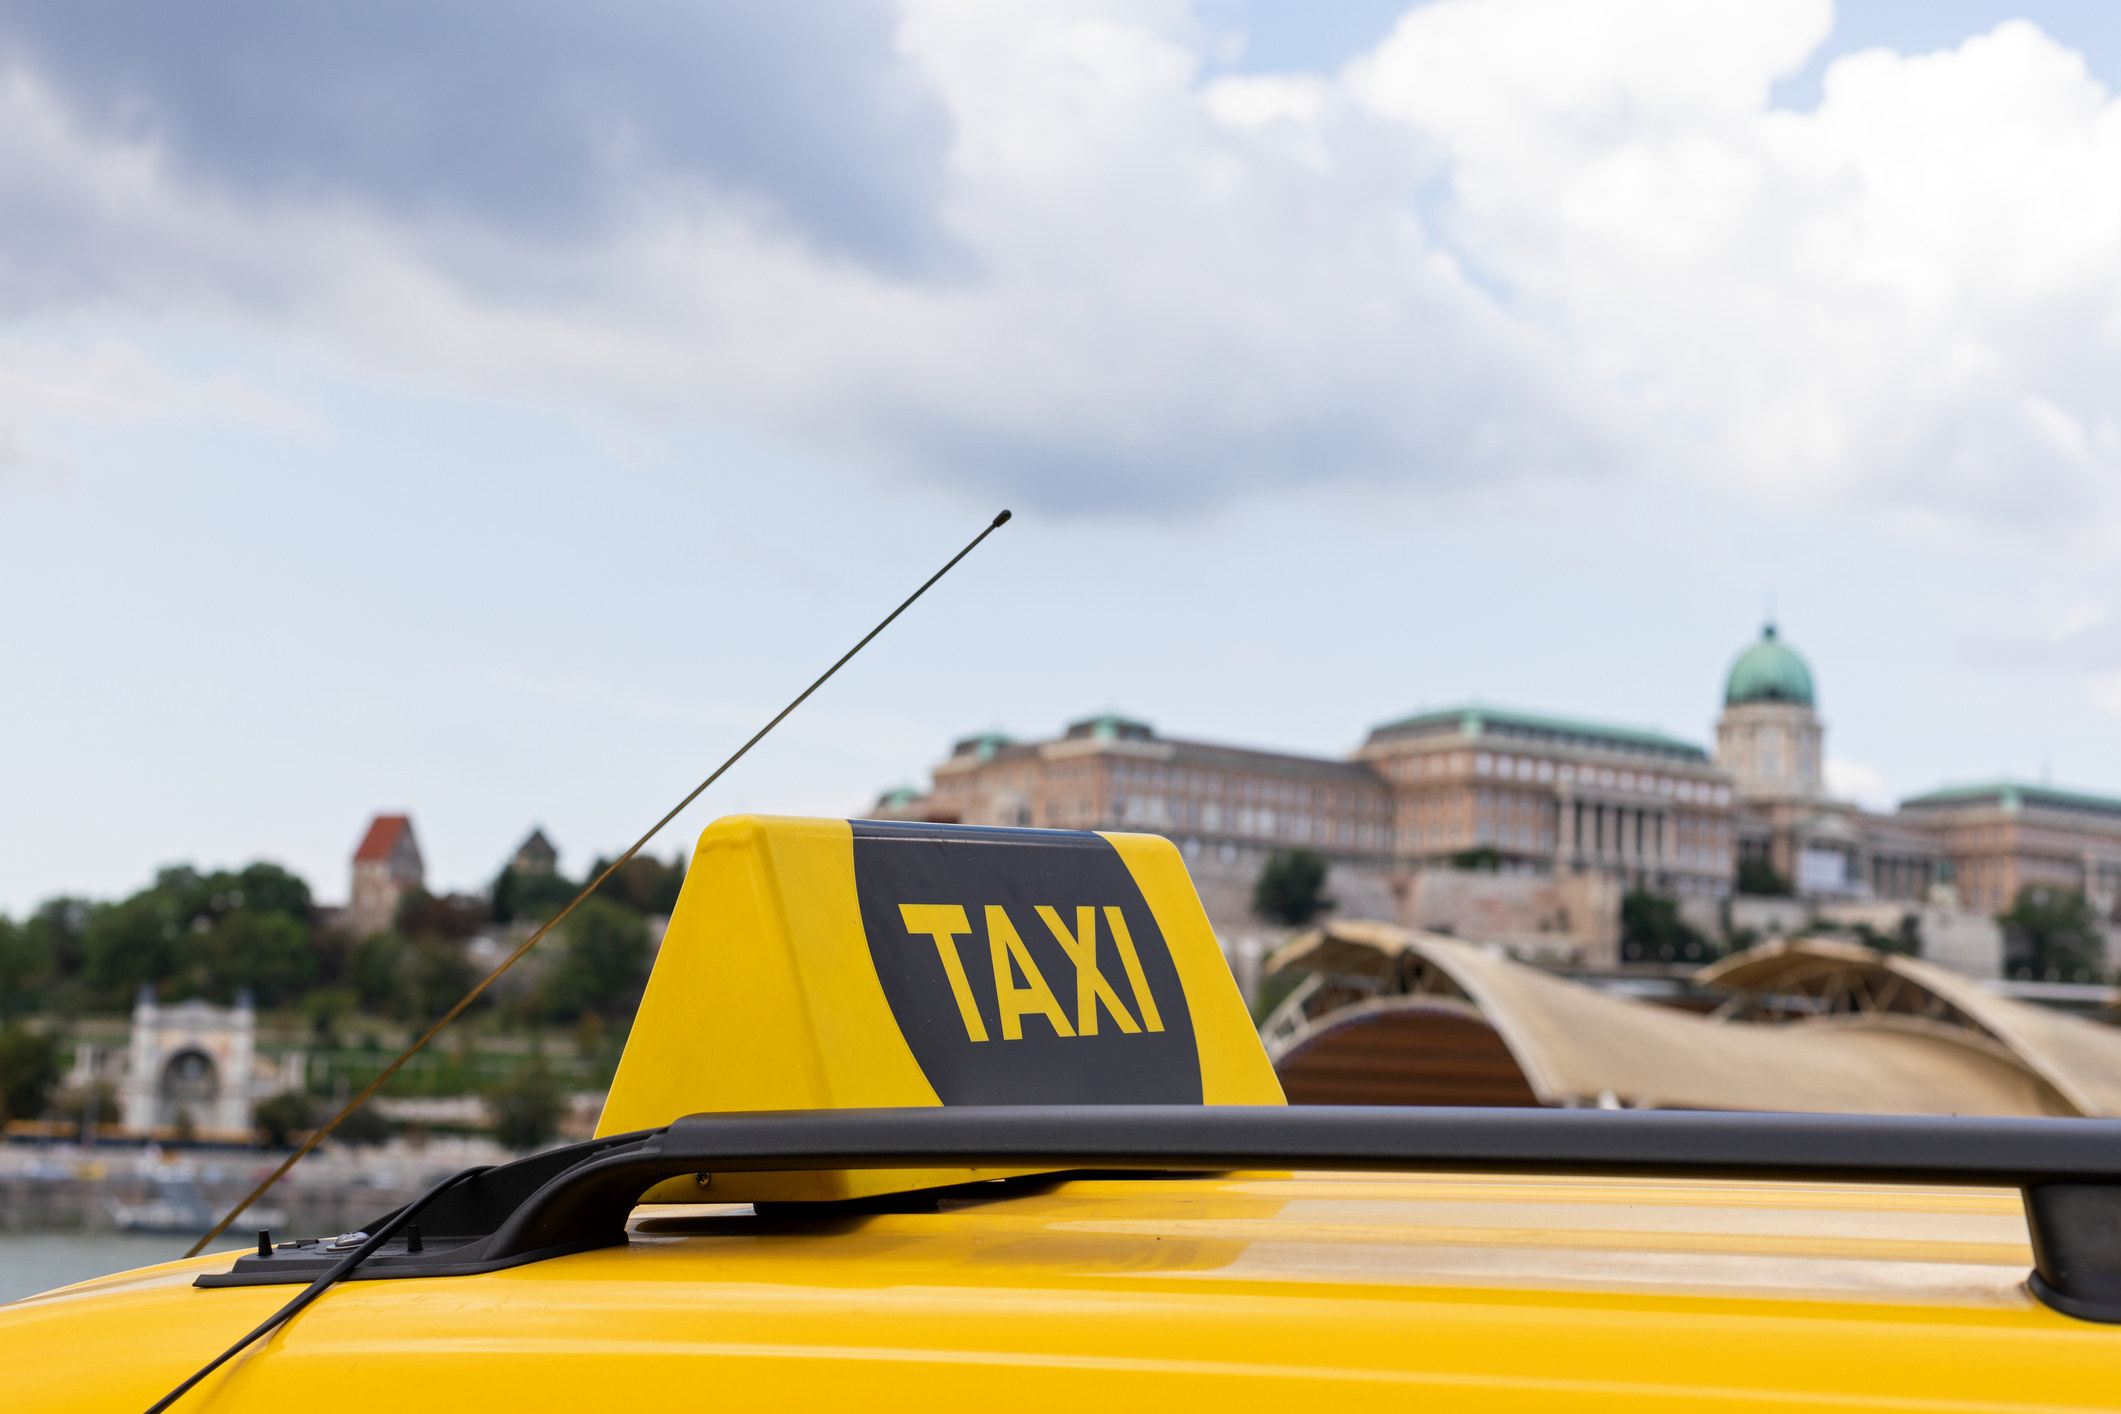 A yellow taxicab in Budapest